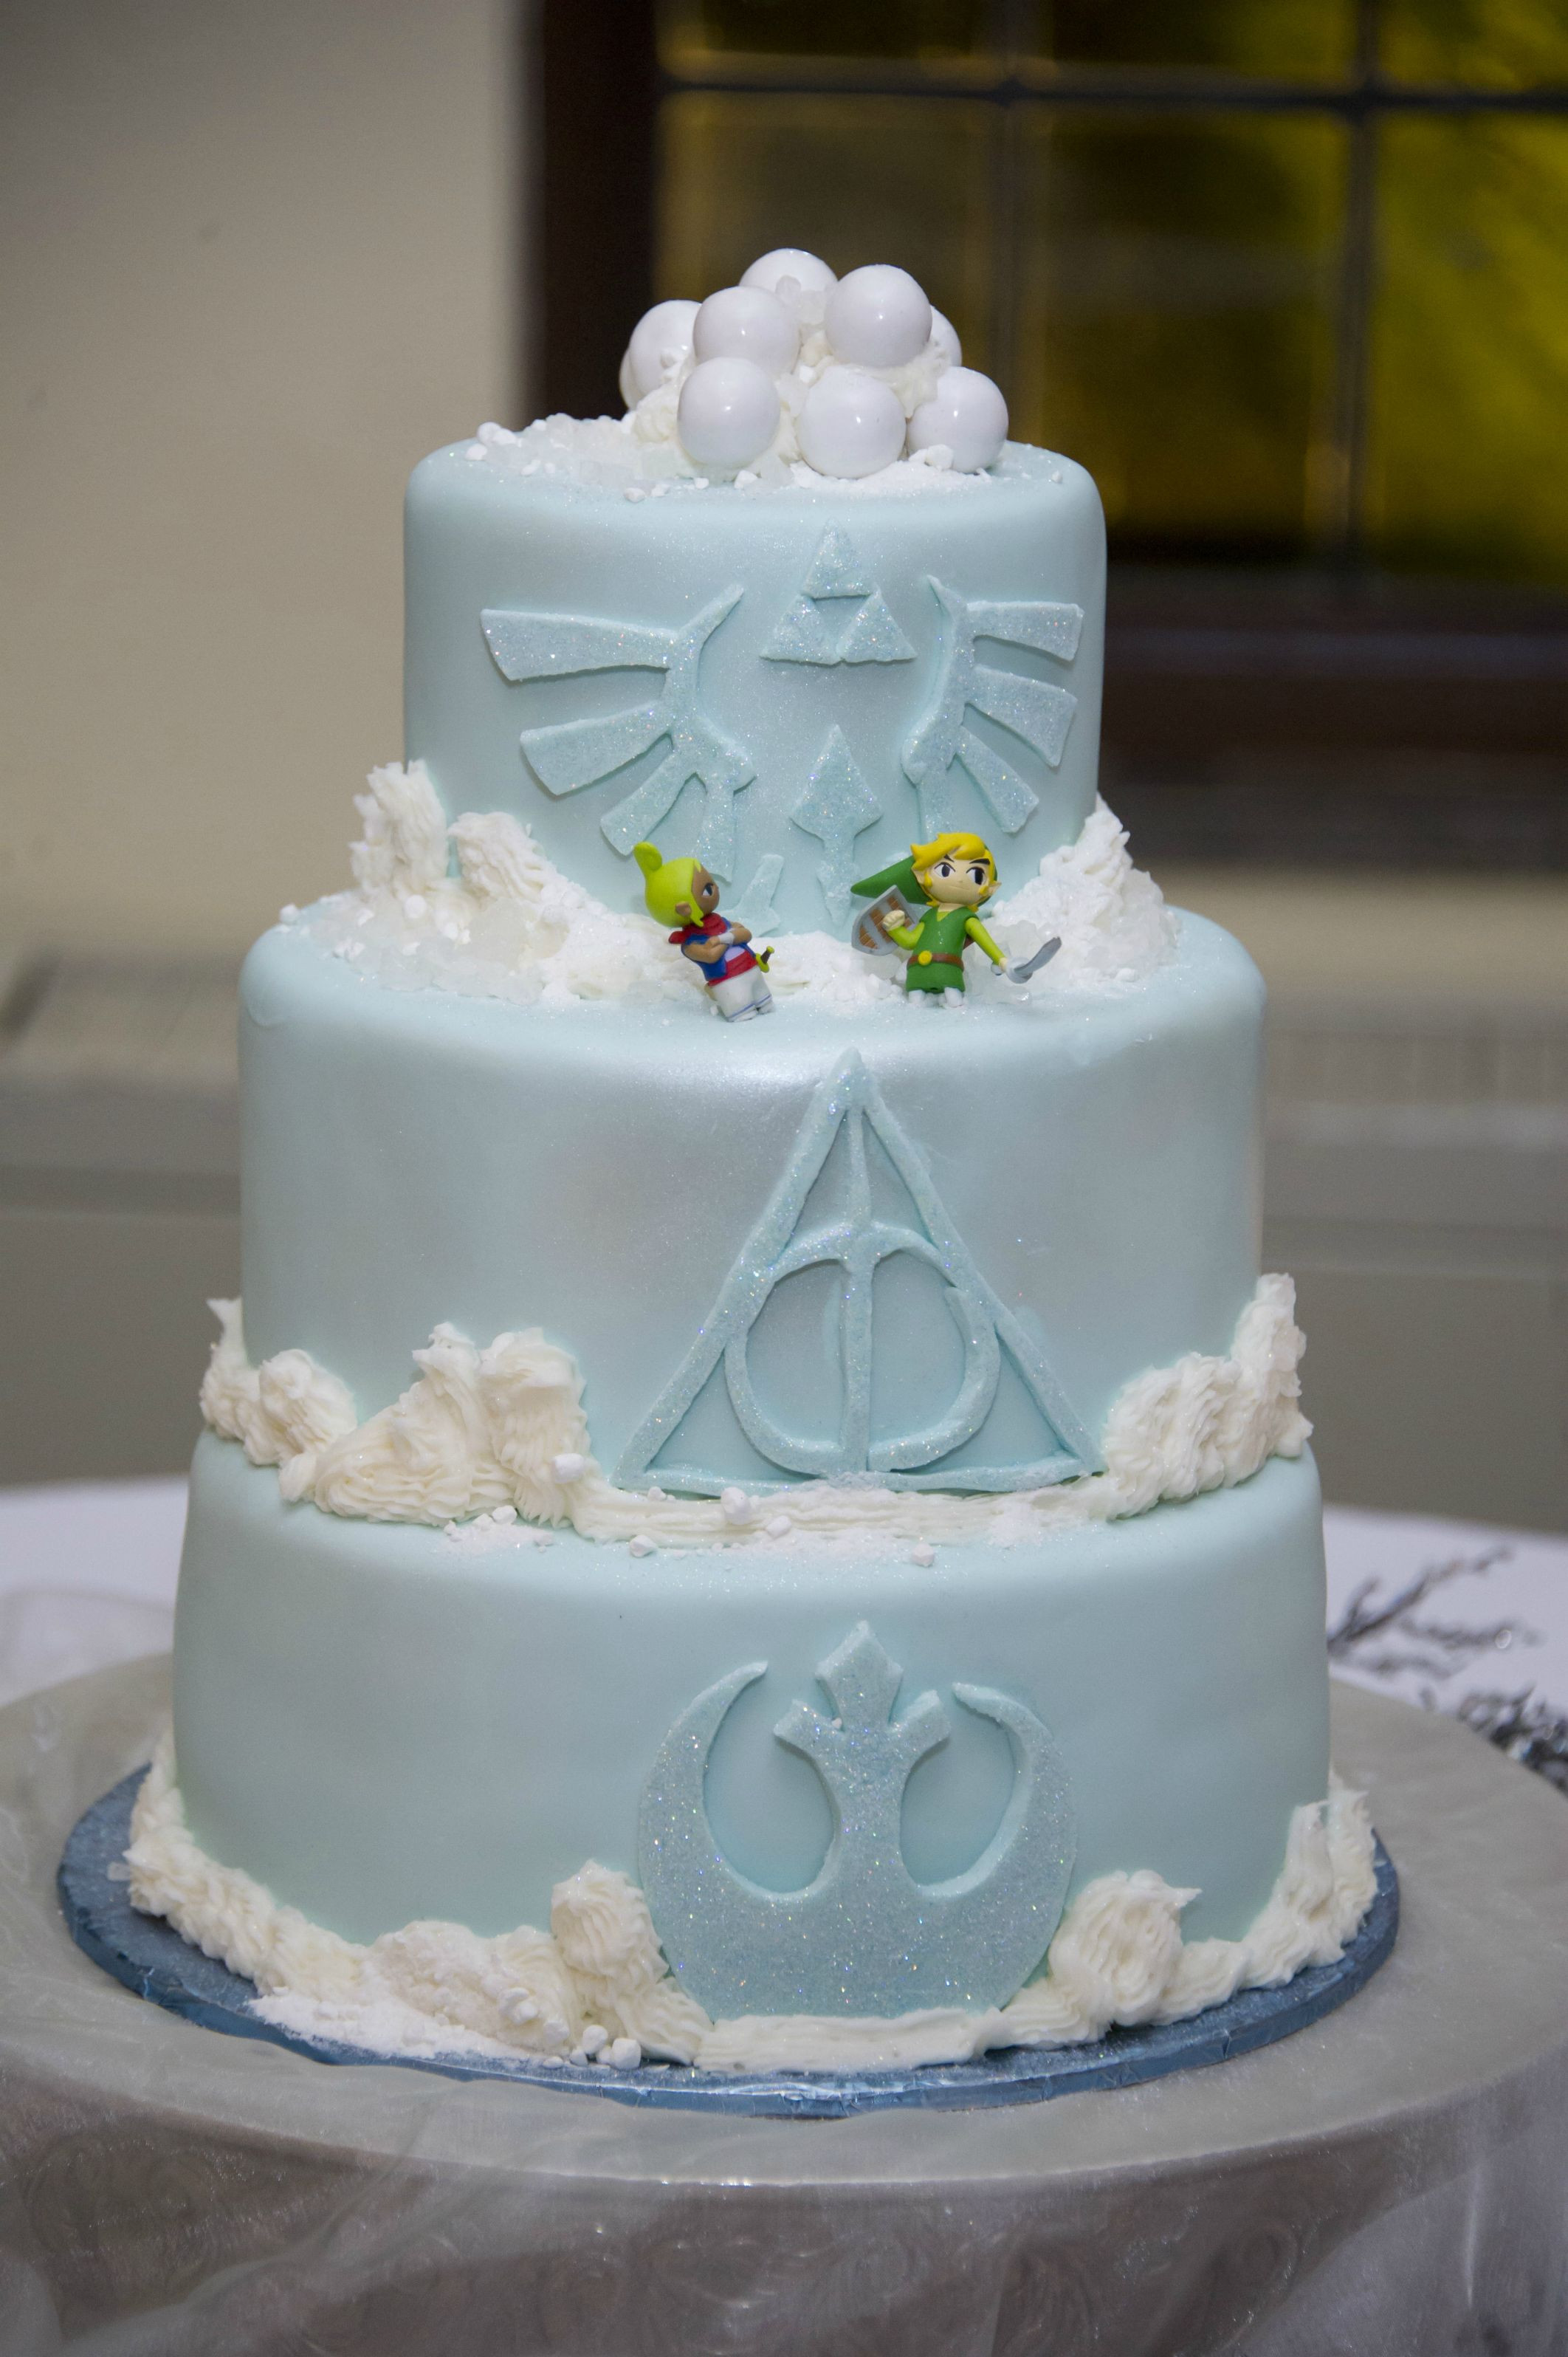 Zelda Wedding Cakes
 26 Nerdy Wedding Cakes to Geek Out Over